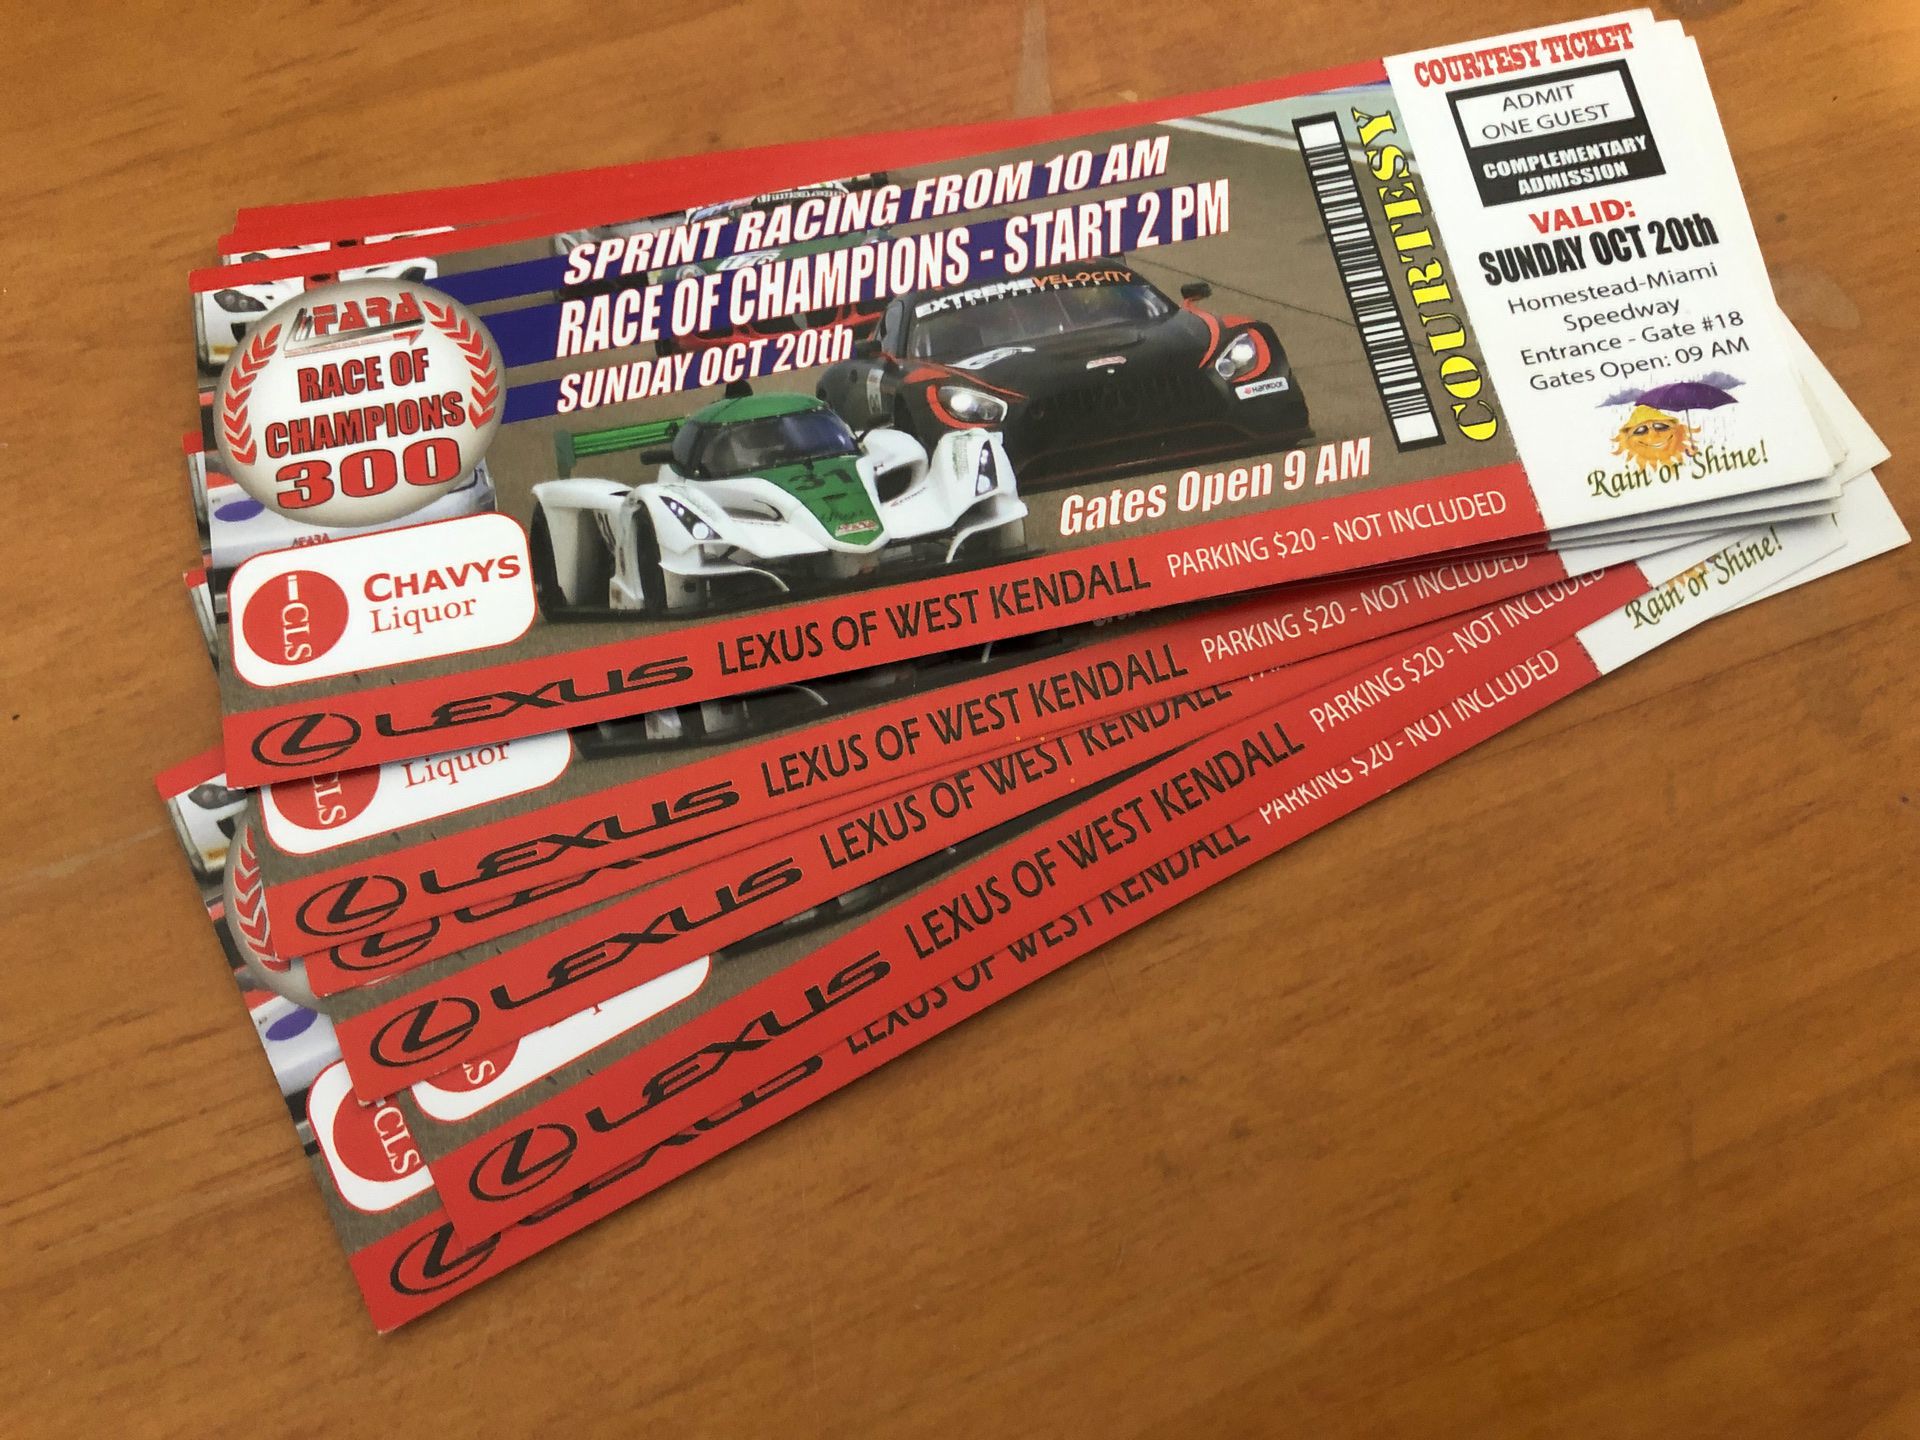 Race of Champions 300 !!!!TICKETS!!!